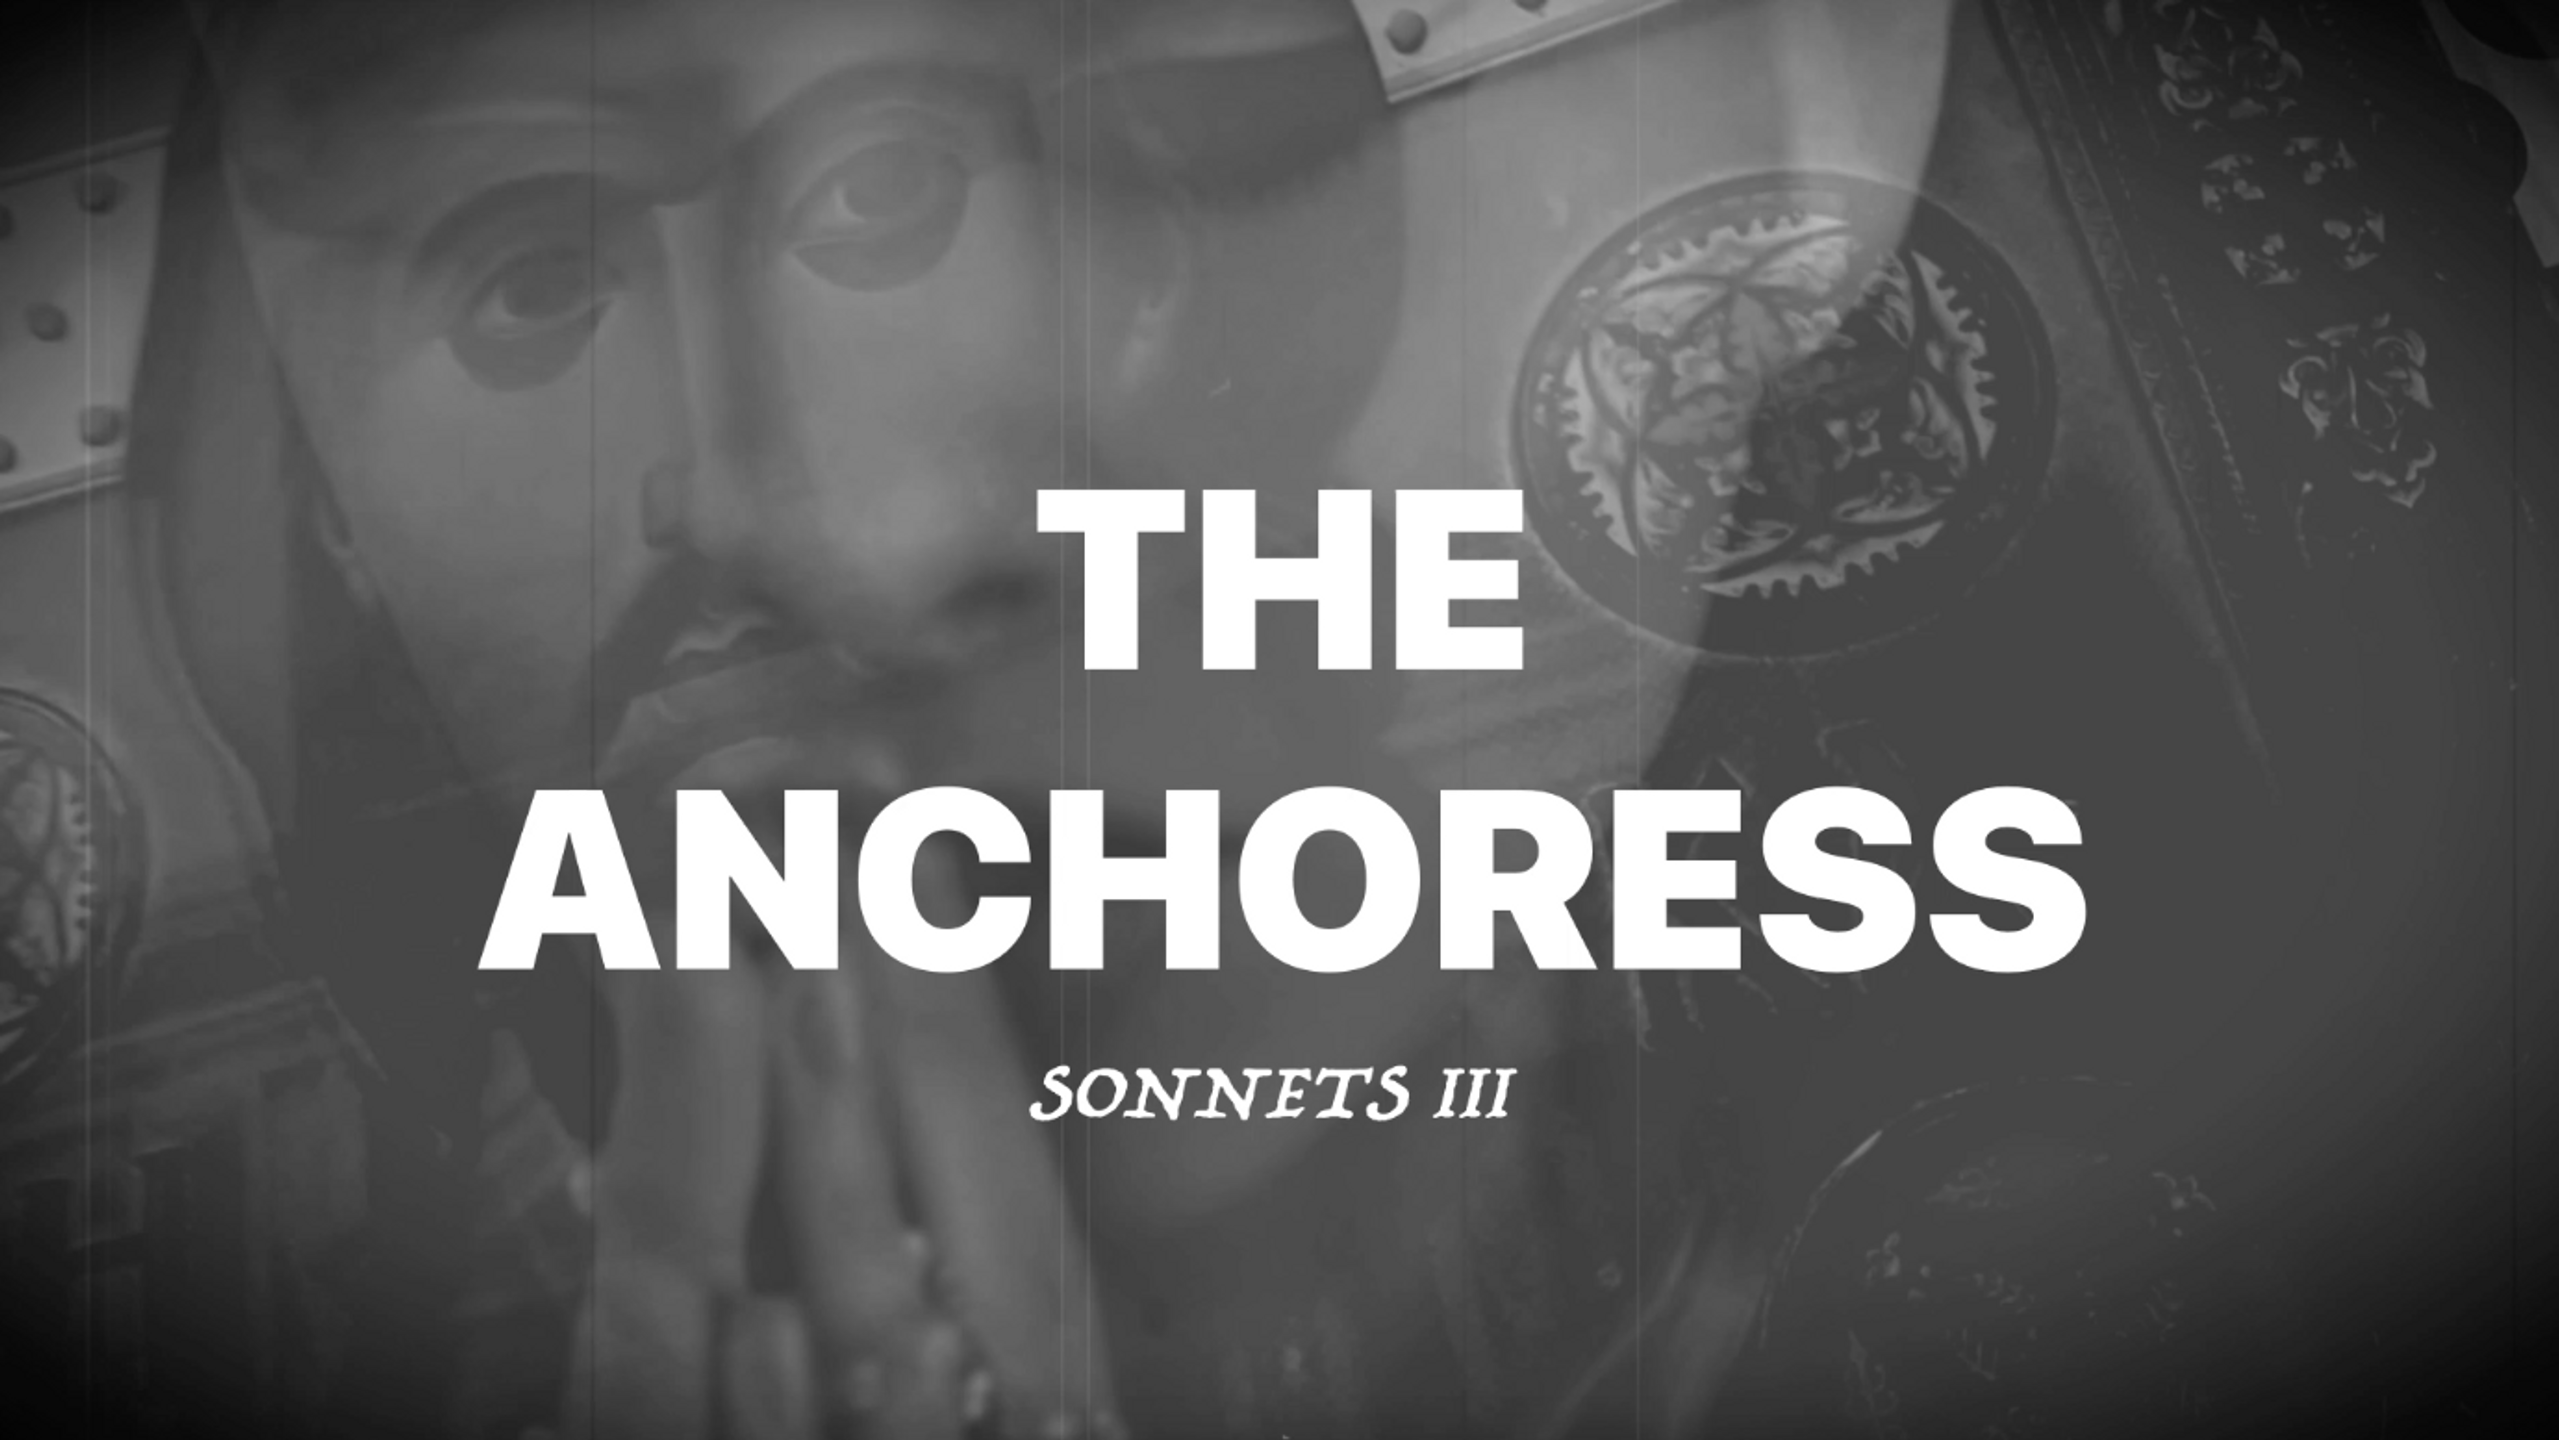 THE ANCHORESS